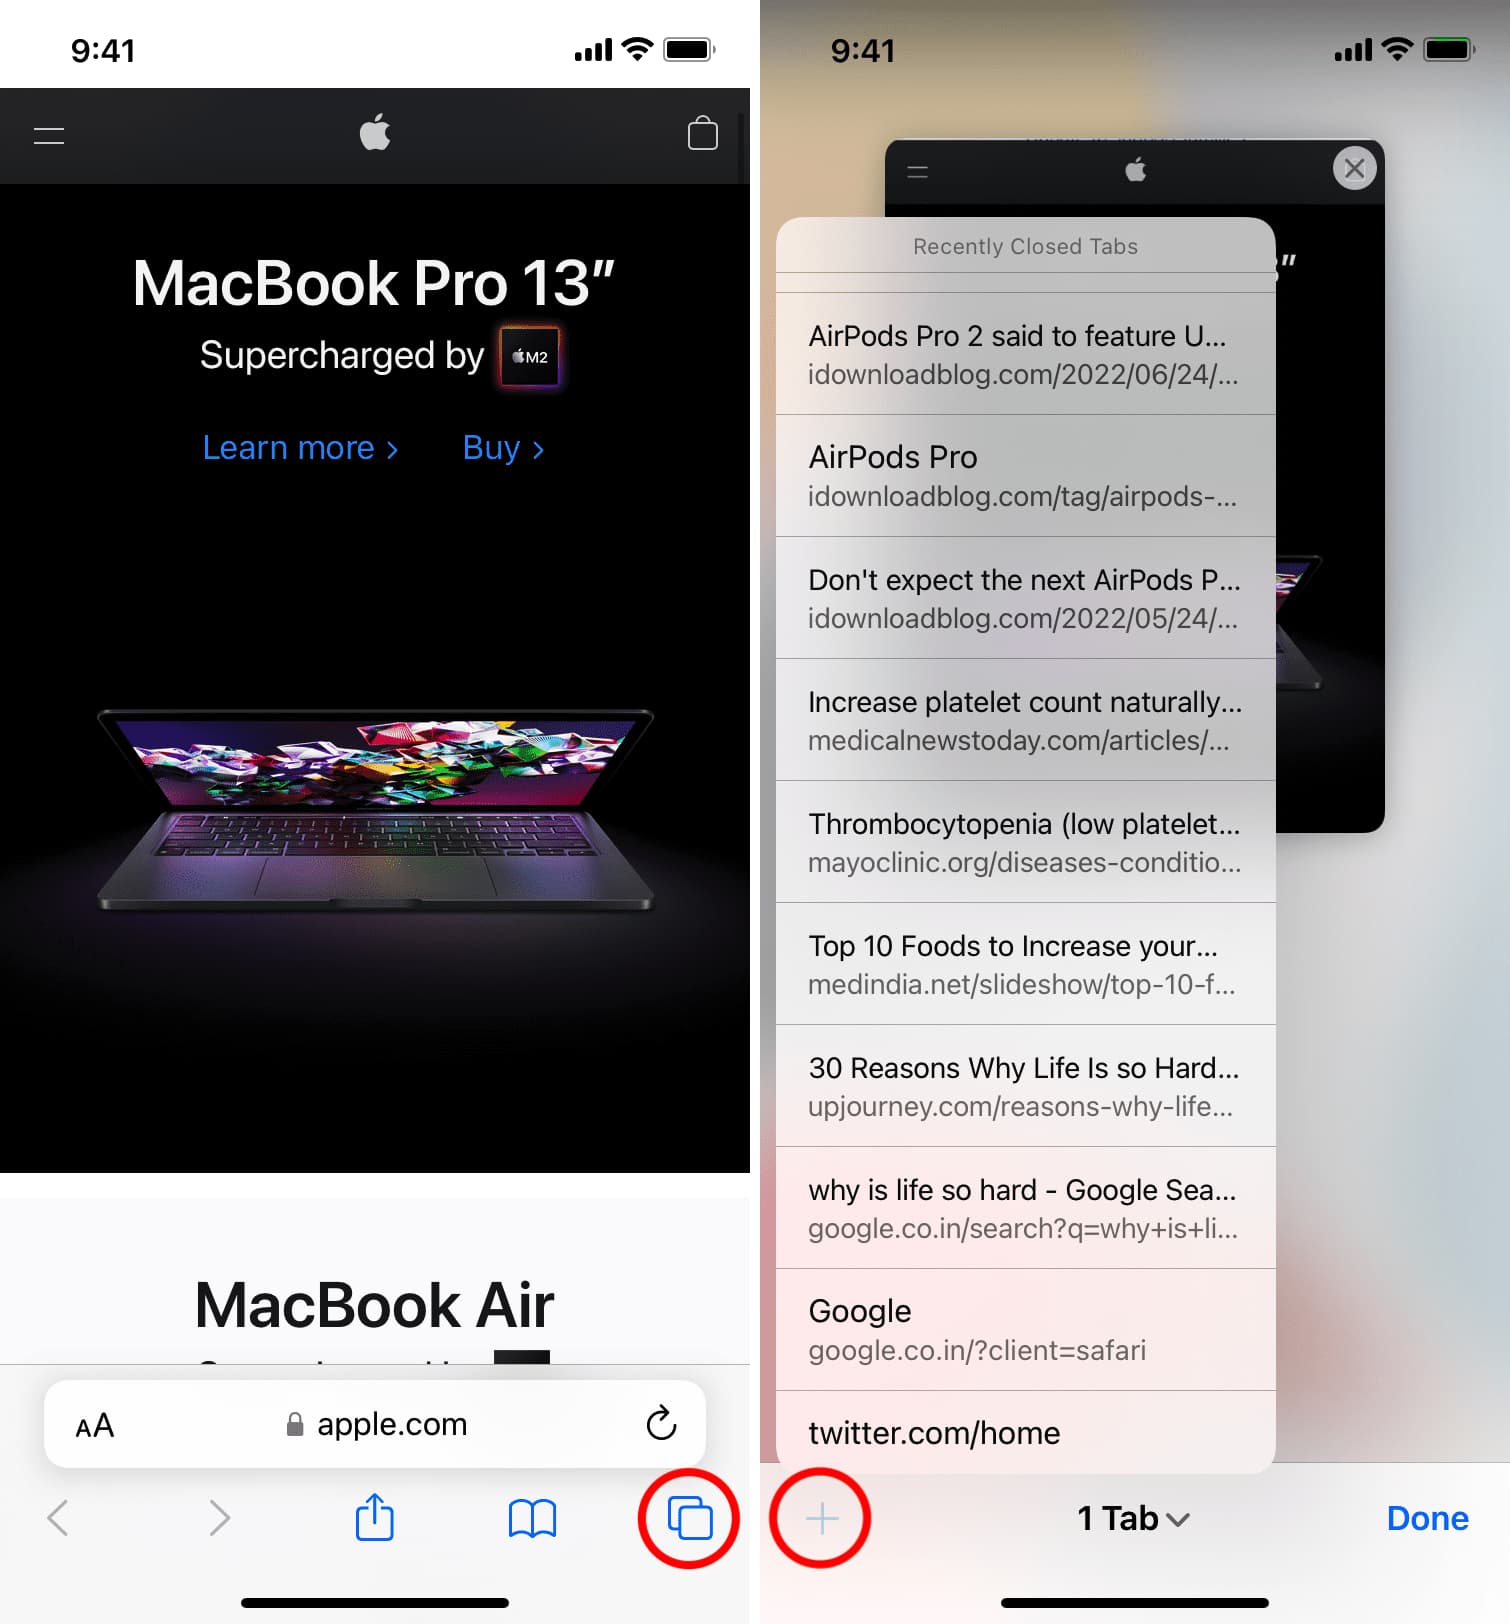 Open recently closed tabs in Safari on iPhone